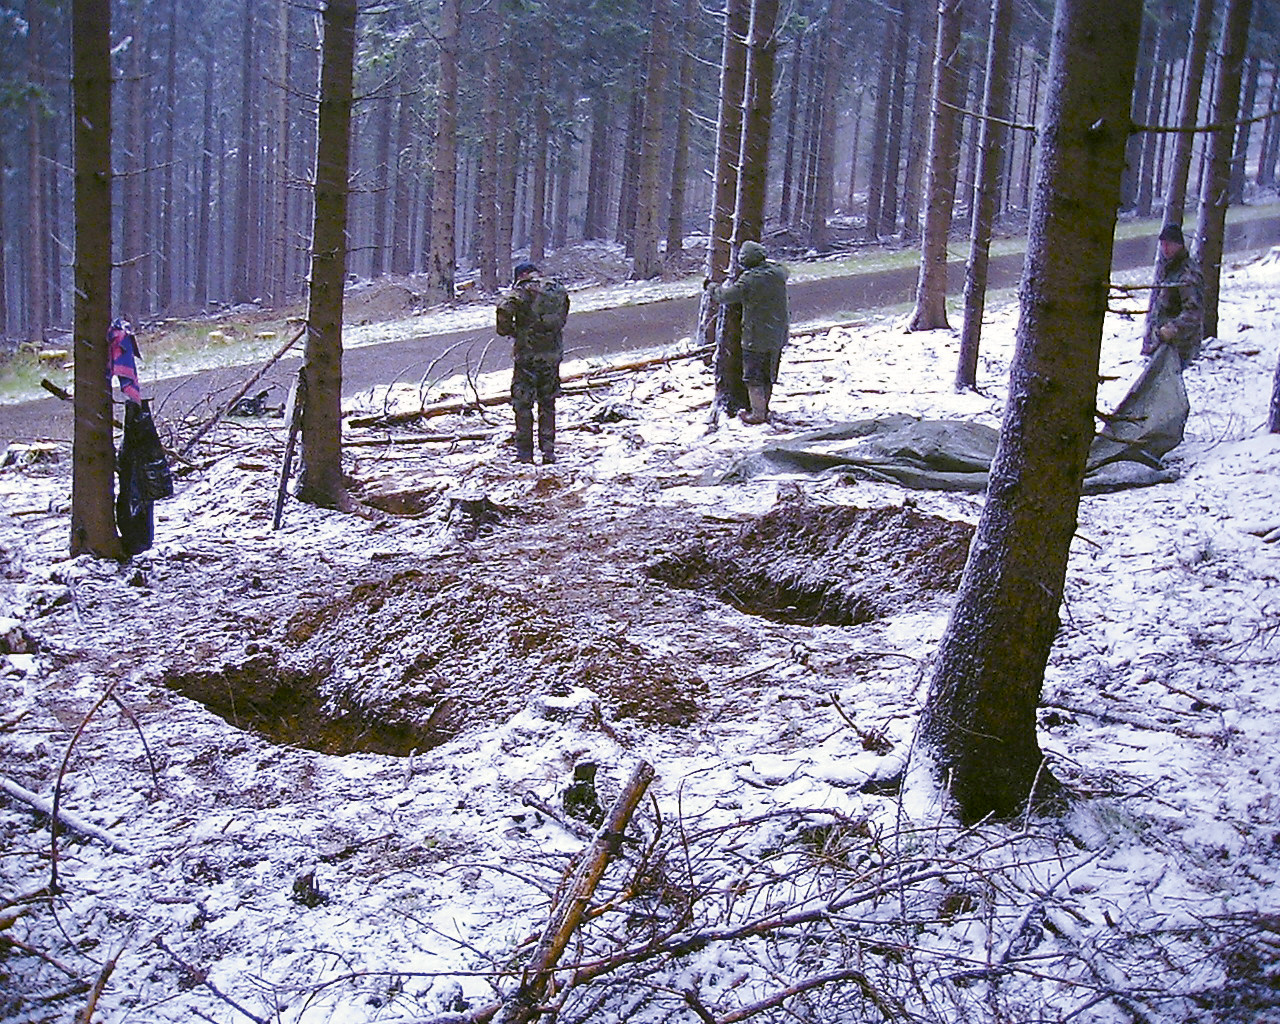 The rediscovered graves of Kokotovich (front left), Beckwith (front right), and Read (rear left) are shown on 88 Hill, April 19, 2001.